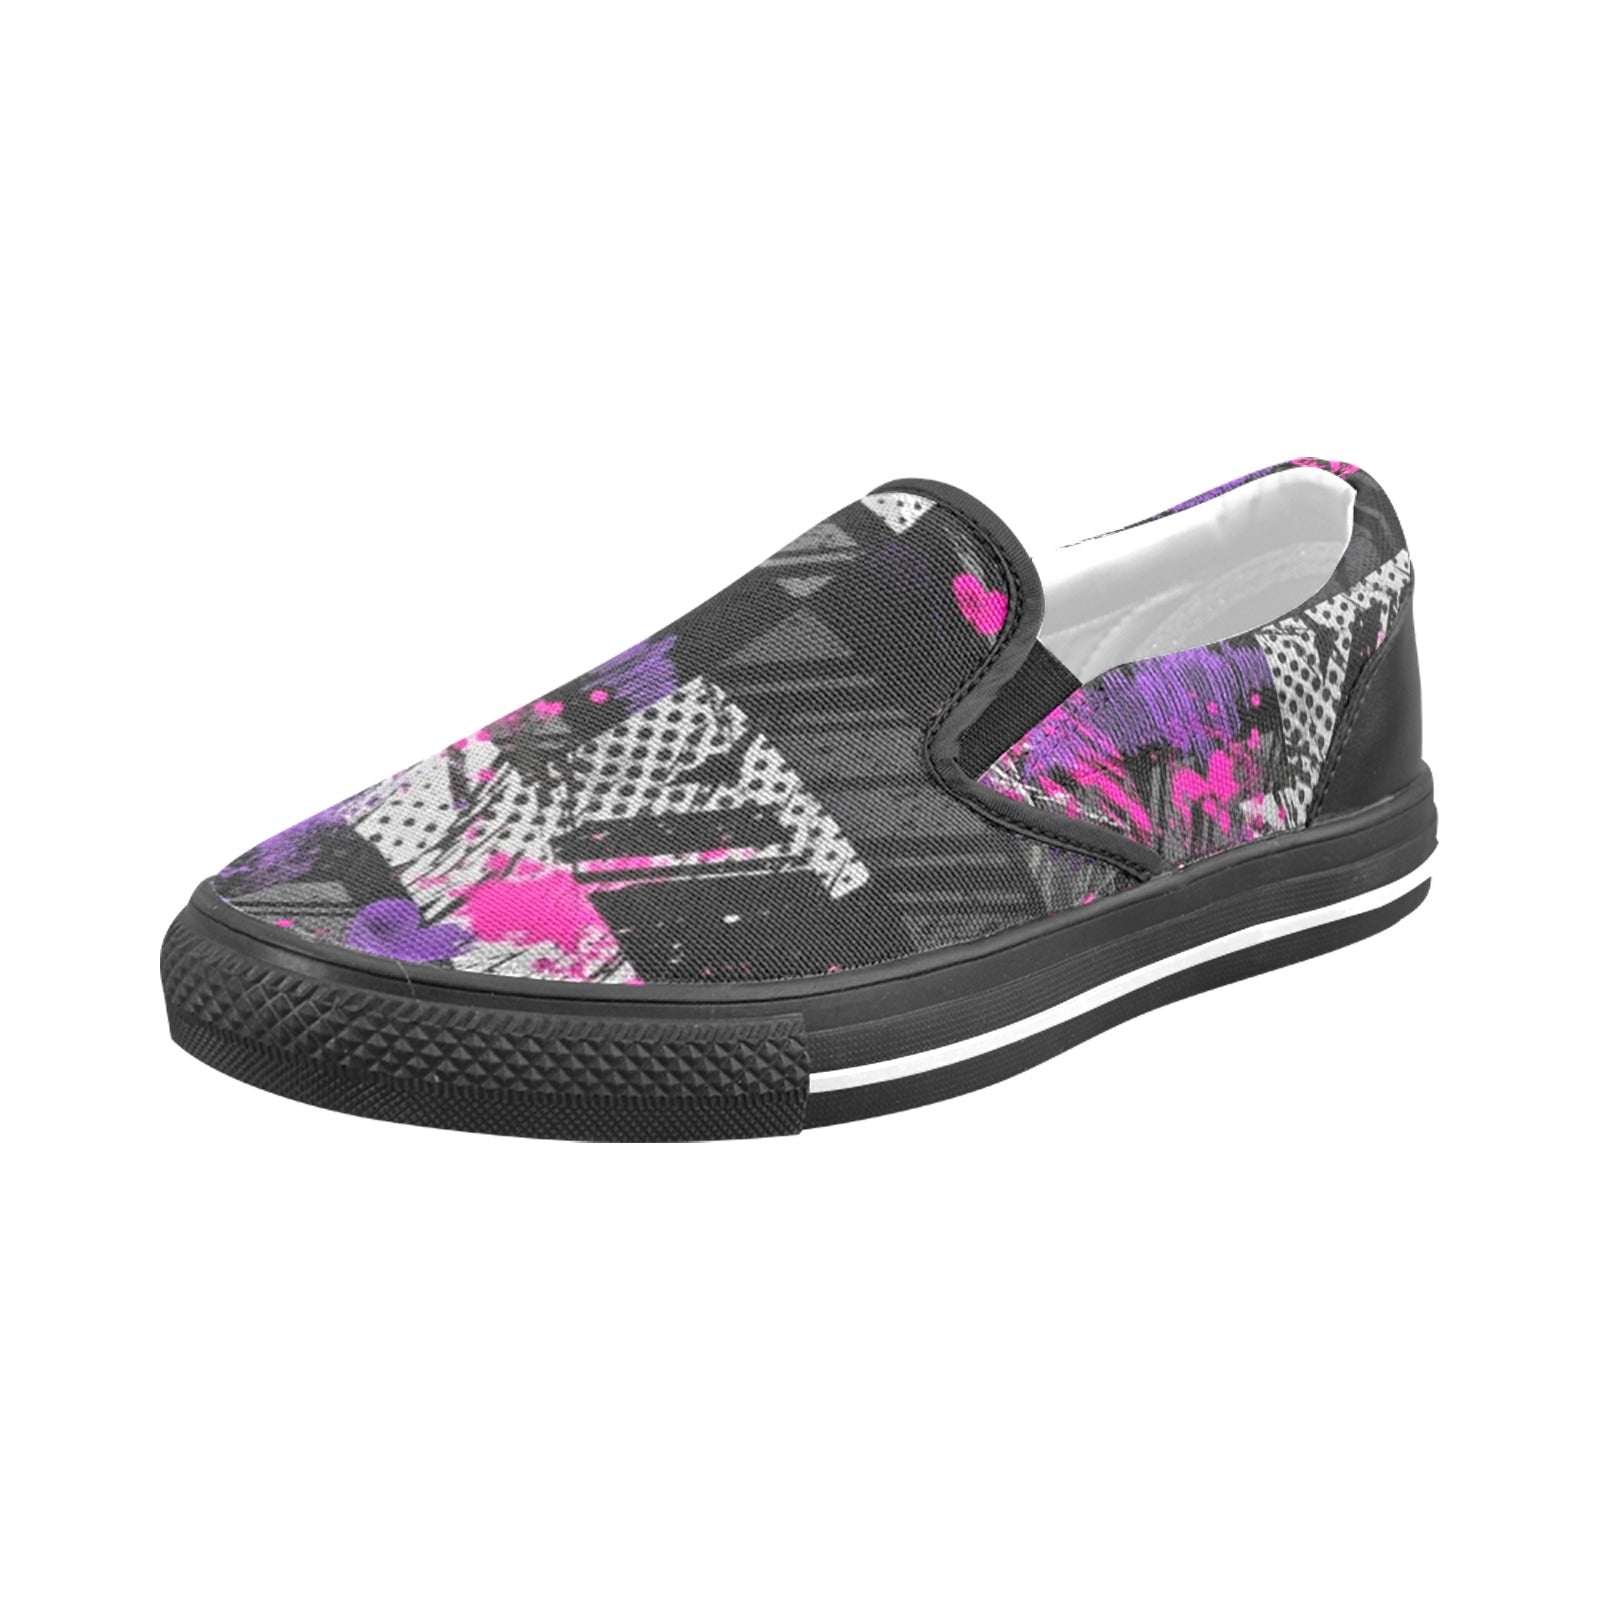 butterfly Slip-on Canvas Shoes